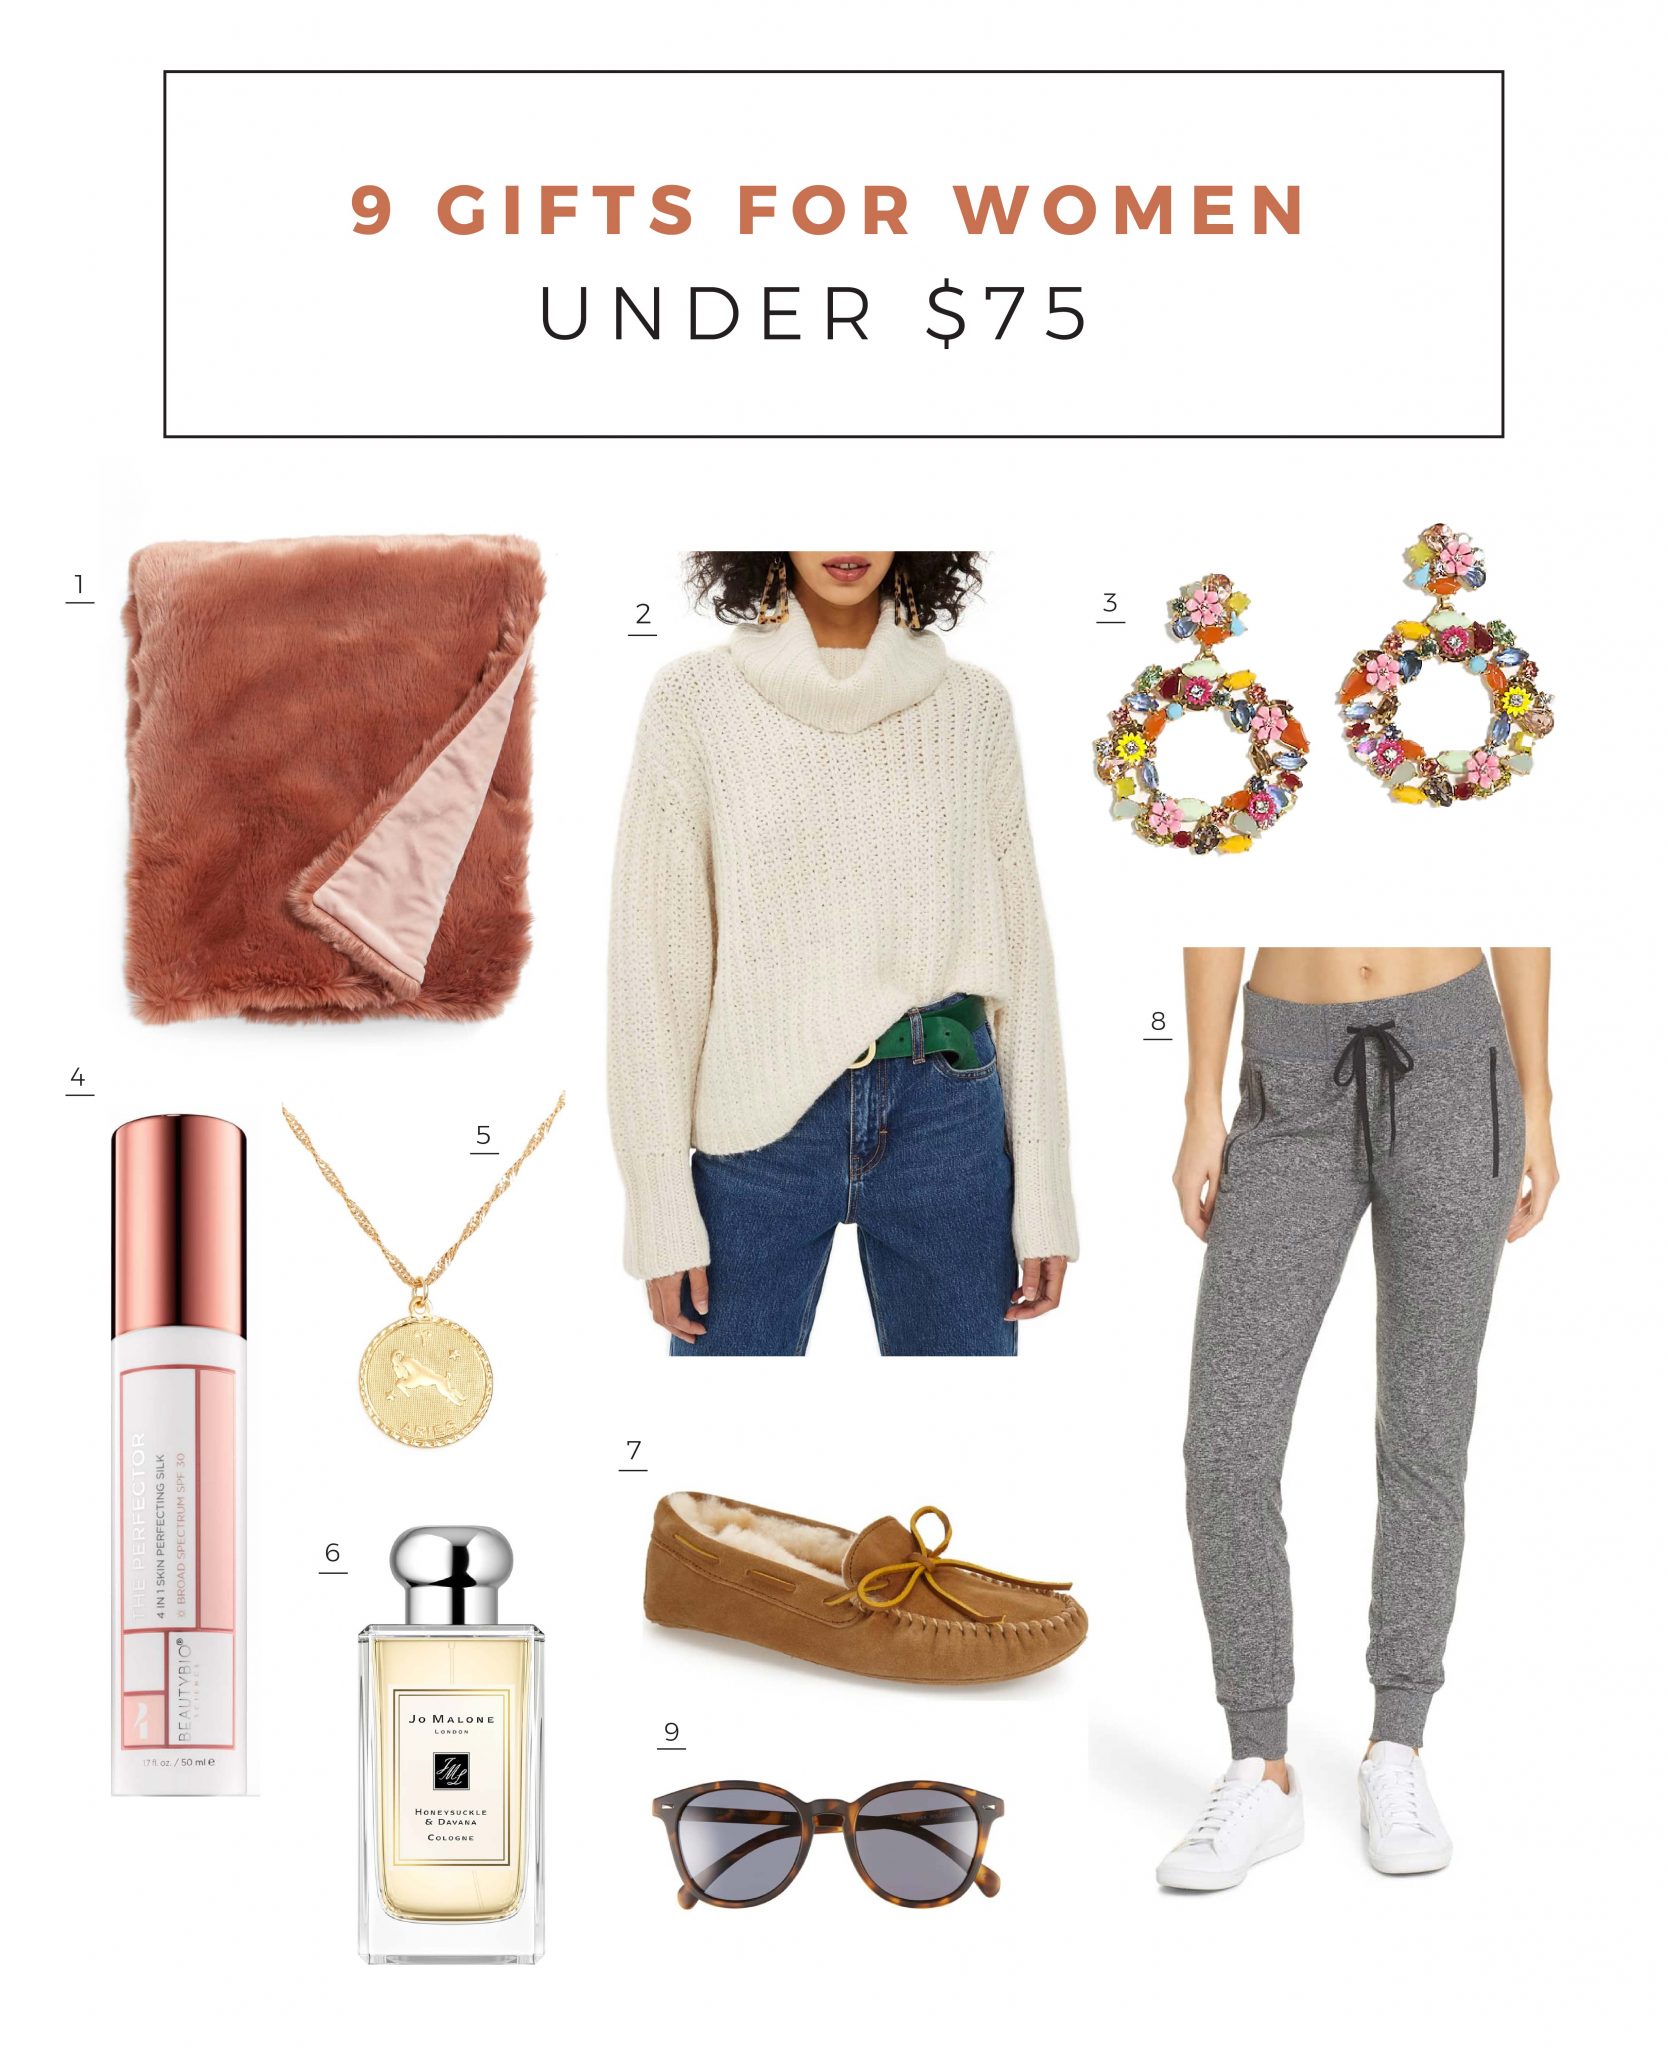 FUN GIFTS FOR HER - UNDER $25 AND $50! - Living in Yellow